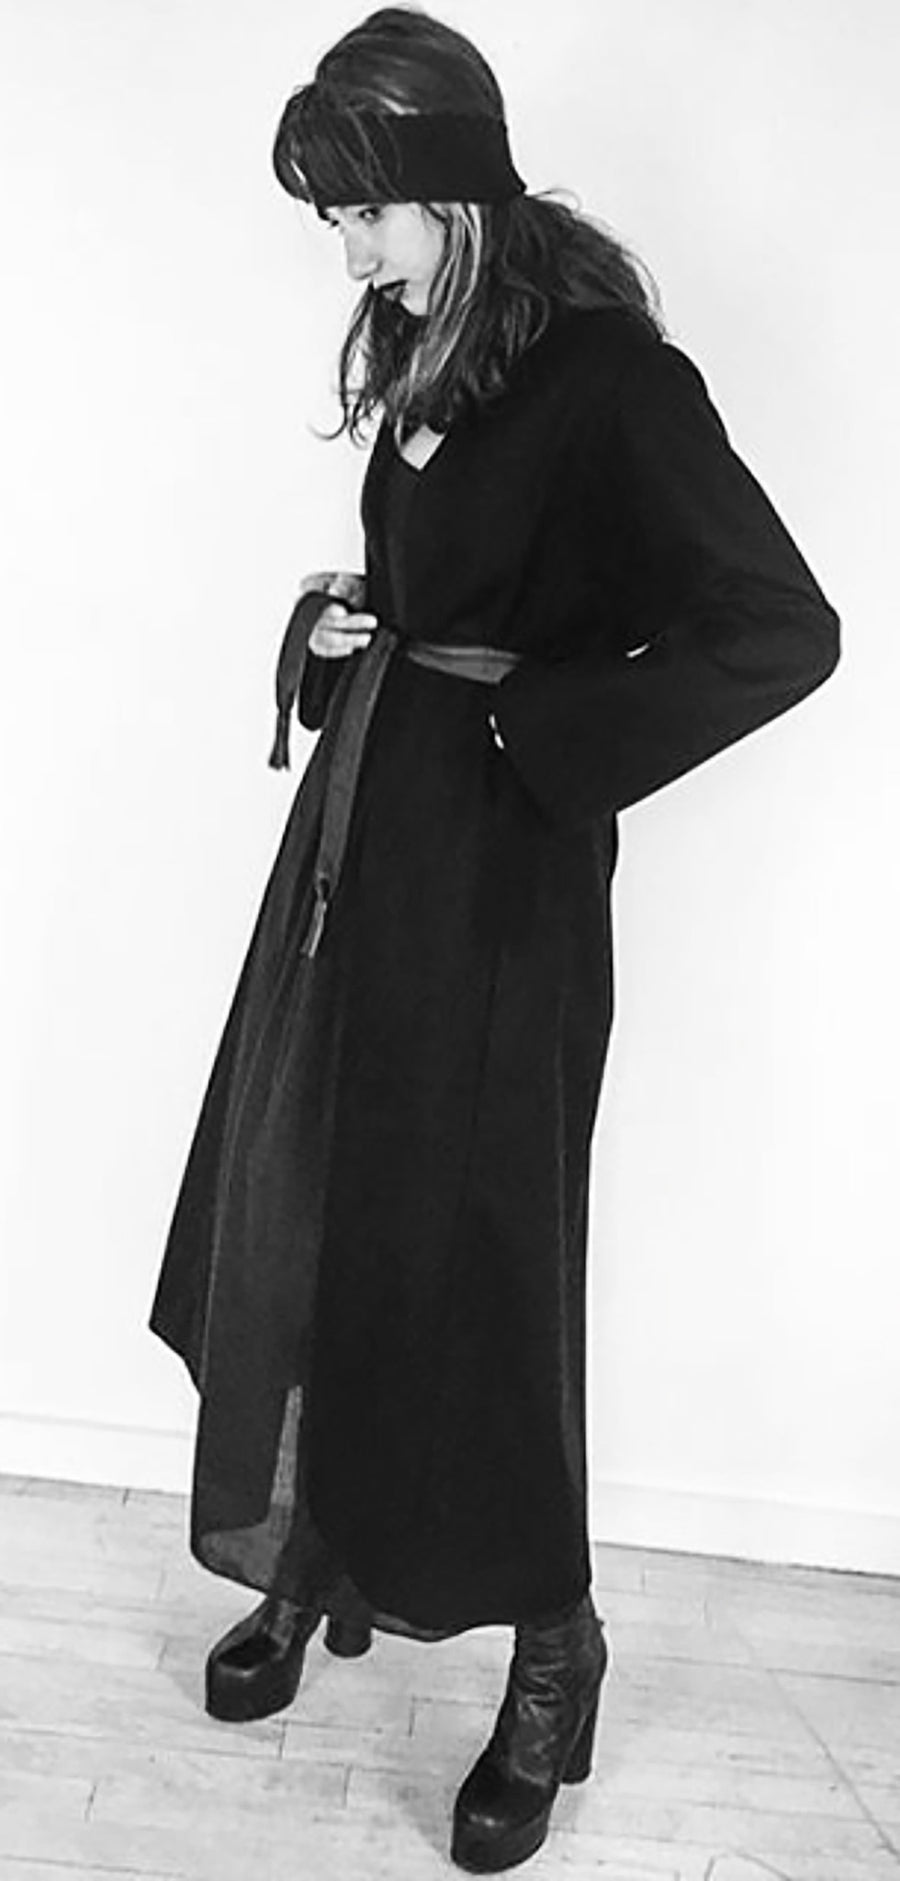 Sofia G. Model Wendy Nichol Clothing Designer Made to Order Custom Tailoring Made to Measure Handmade in NYC New York City Fashion Runway Show AW16 13 Incarnations High Collar Long Cashmere Coat Leather Collar and belt pockets Silk Lining Perfect Long Winter Fall Coat High quality Silk Charmeuse Leather Cashmere